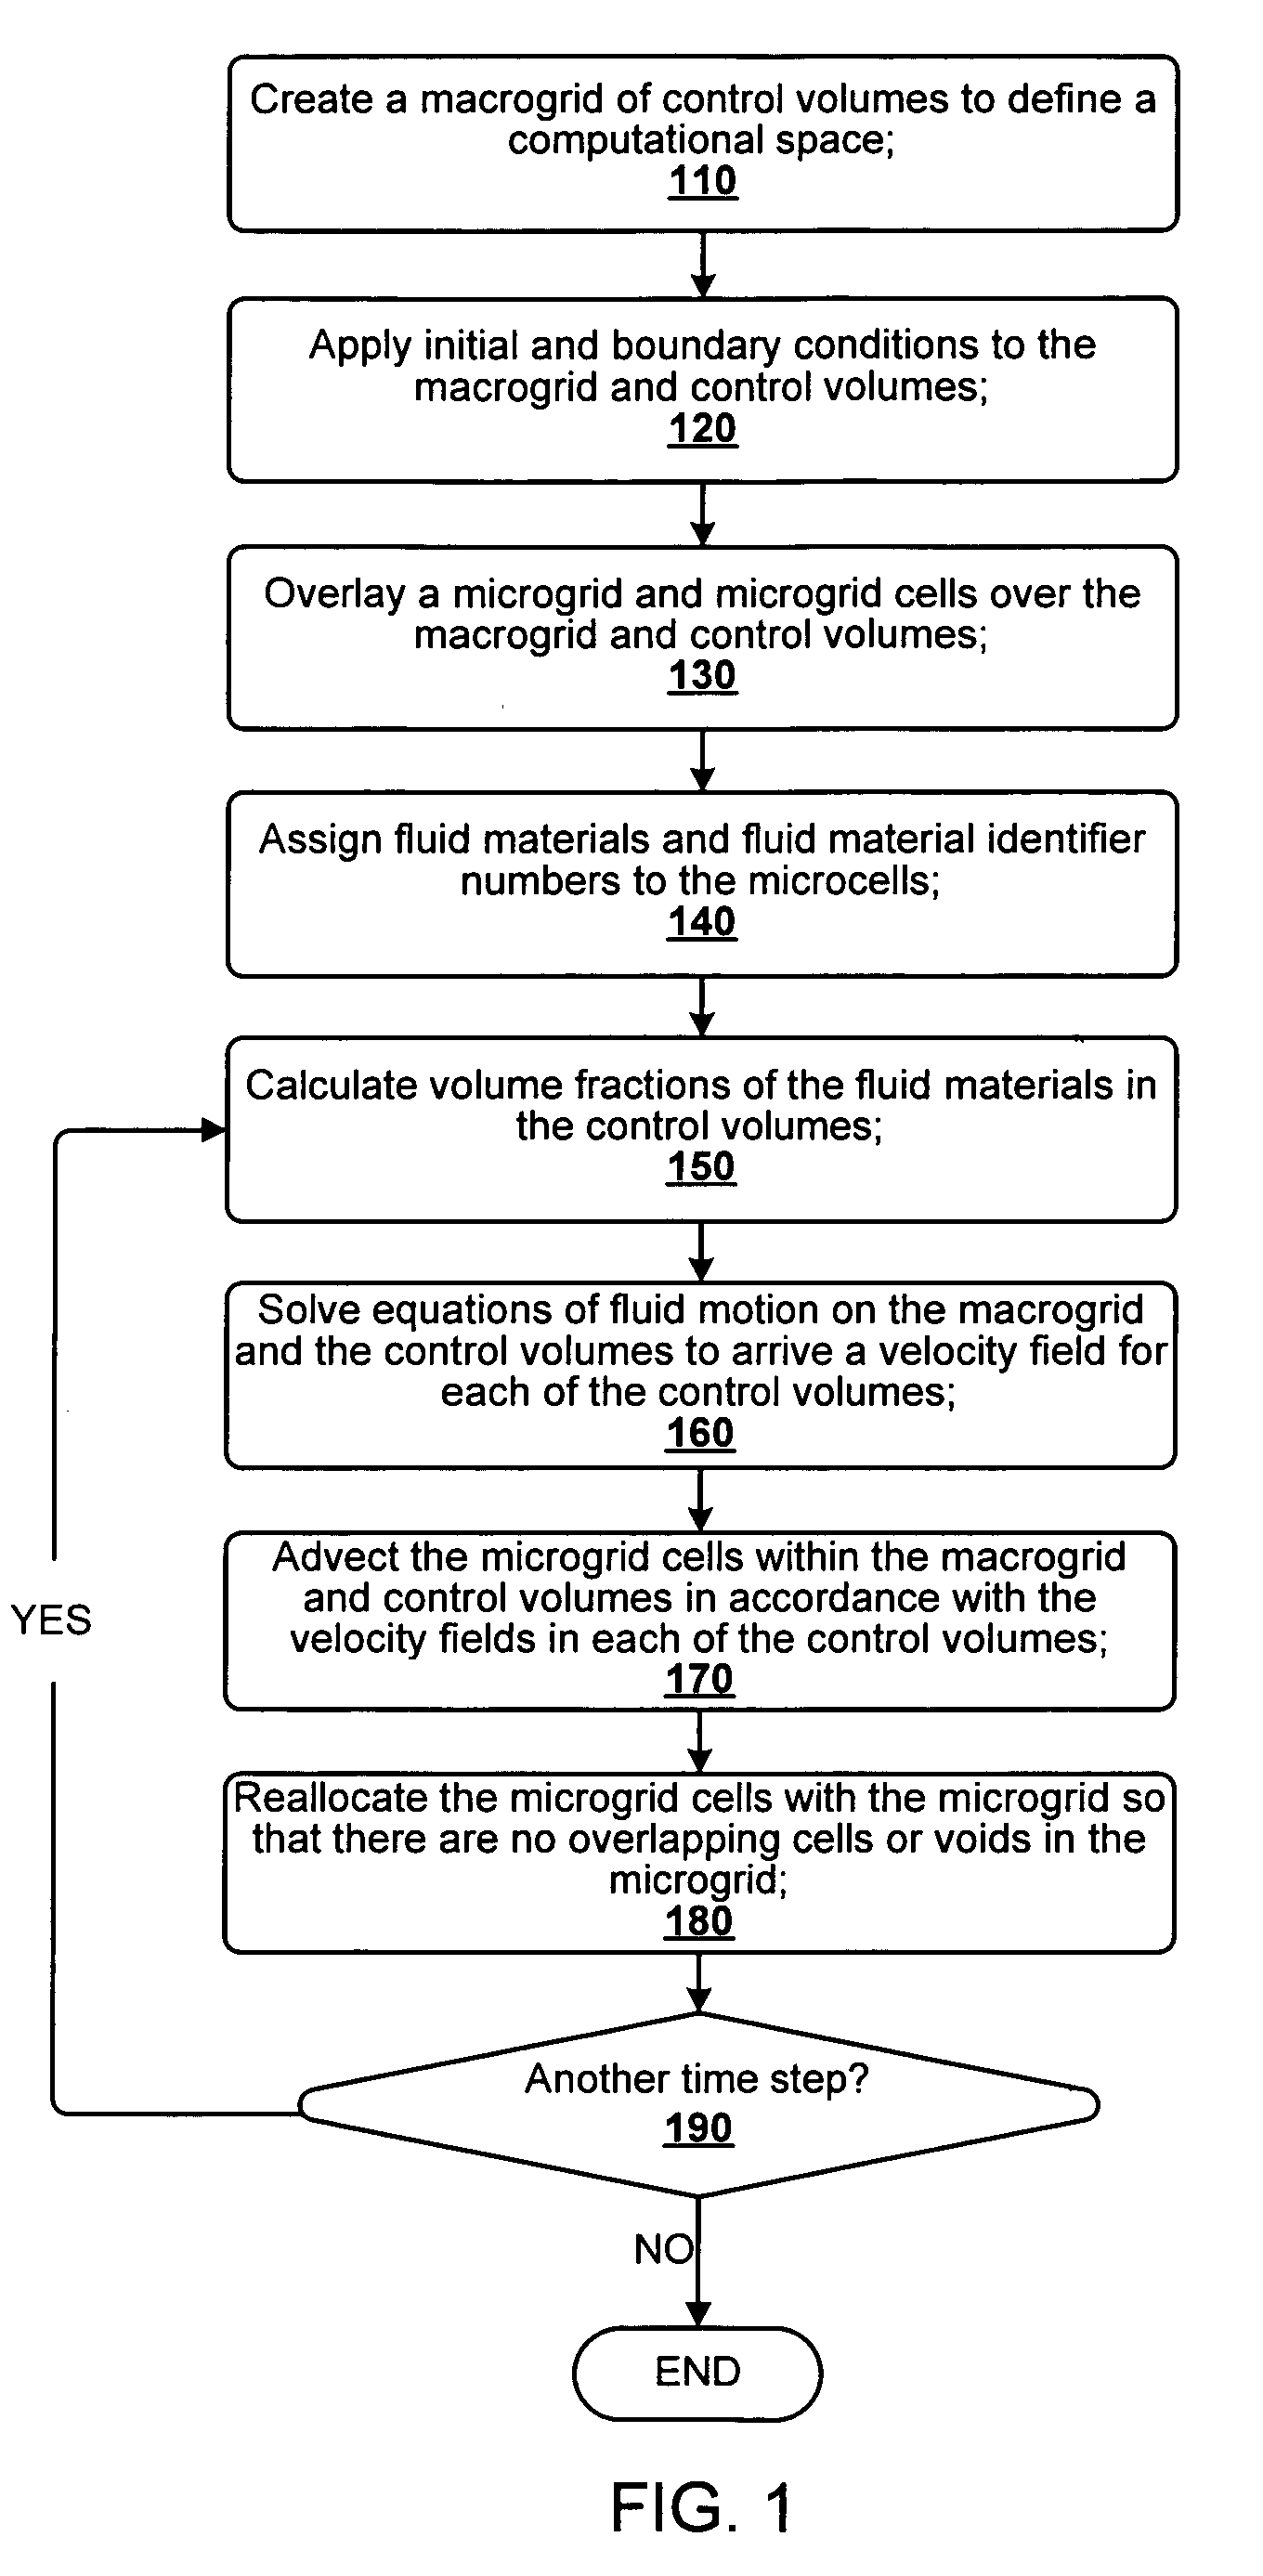 N-phase interface tracking method utilizing unique enumeration of microgrid cells